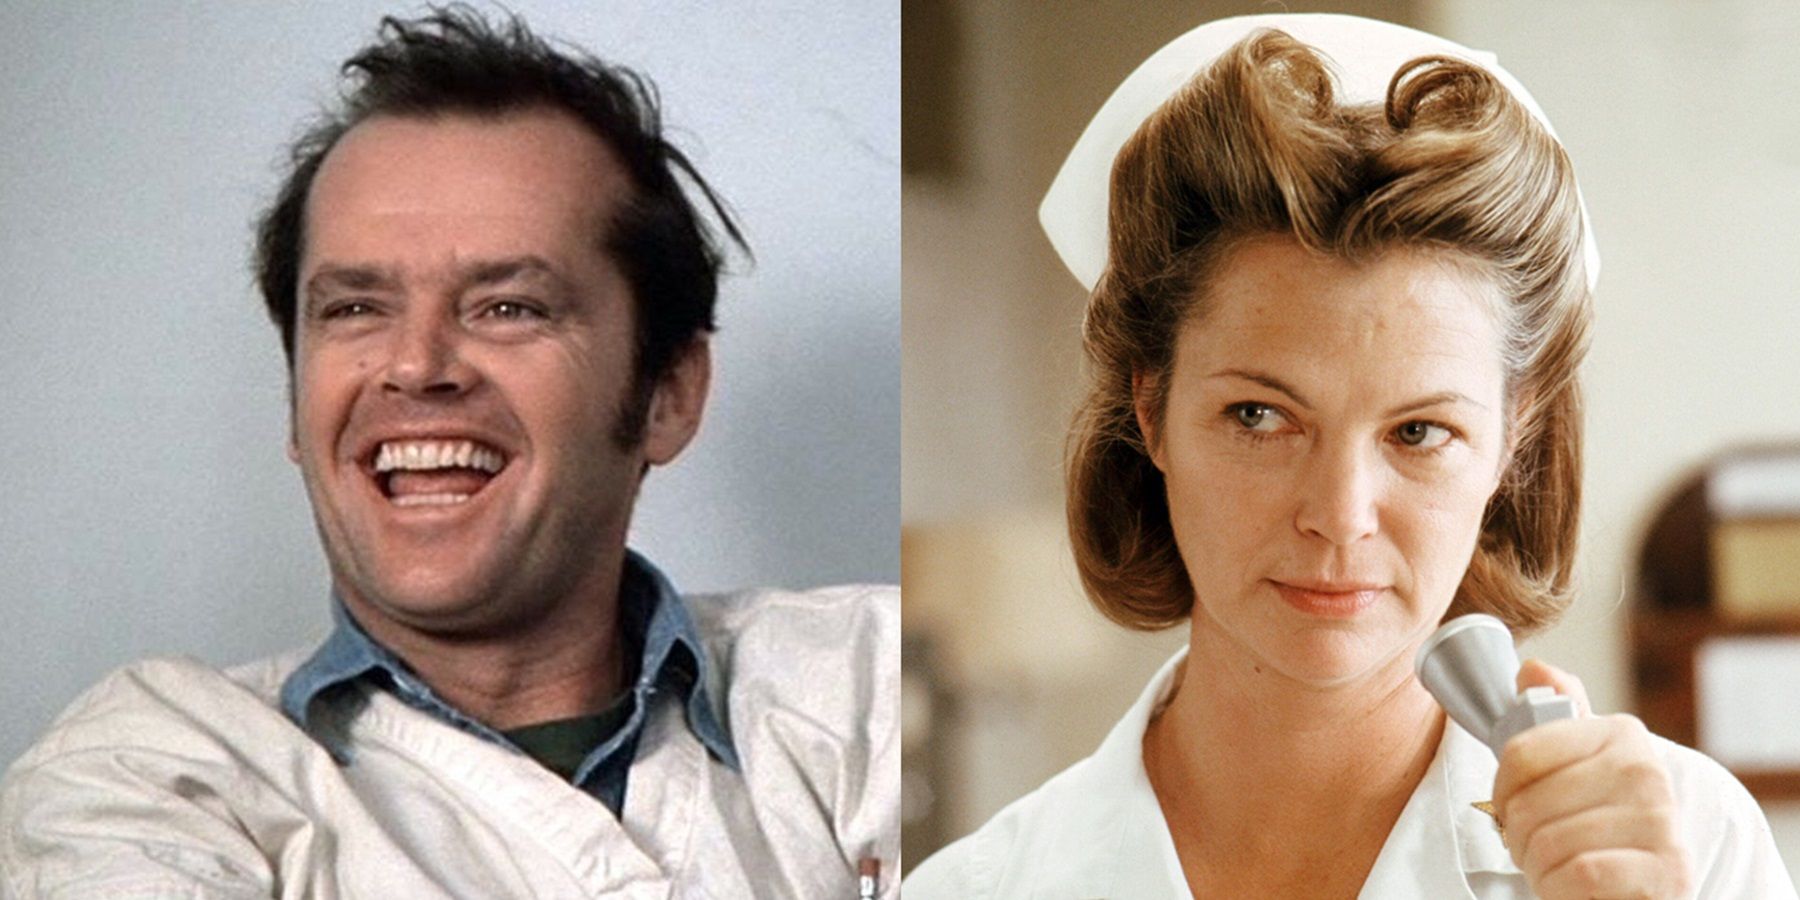 Randle McMurphy and Nurse Ratched in One Flew Over the Cuckoo's Nest